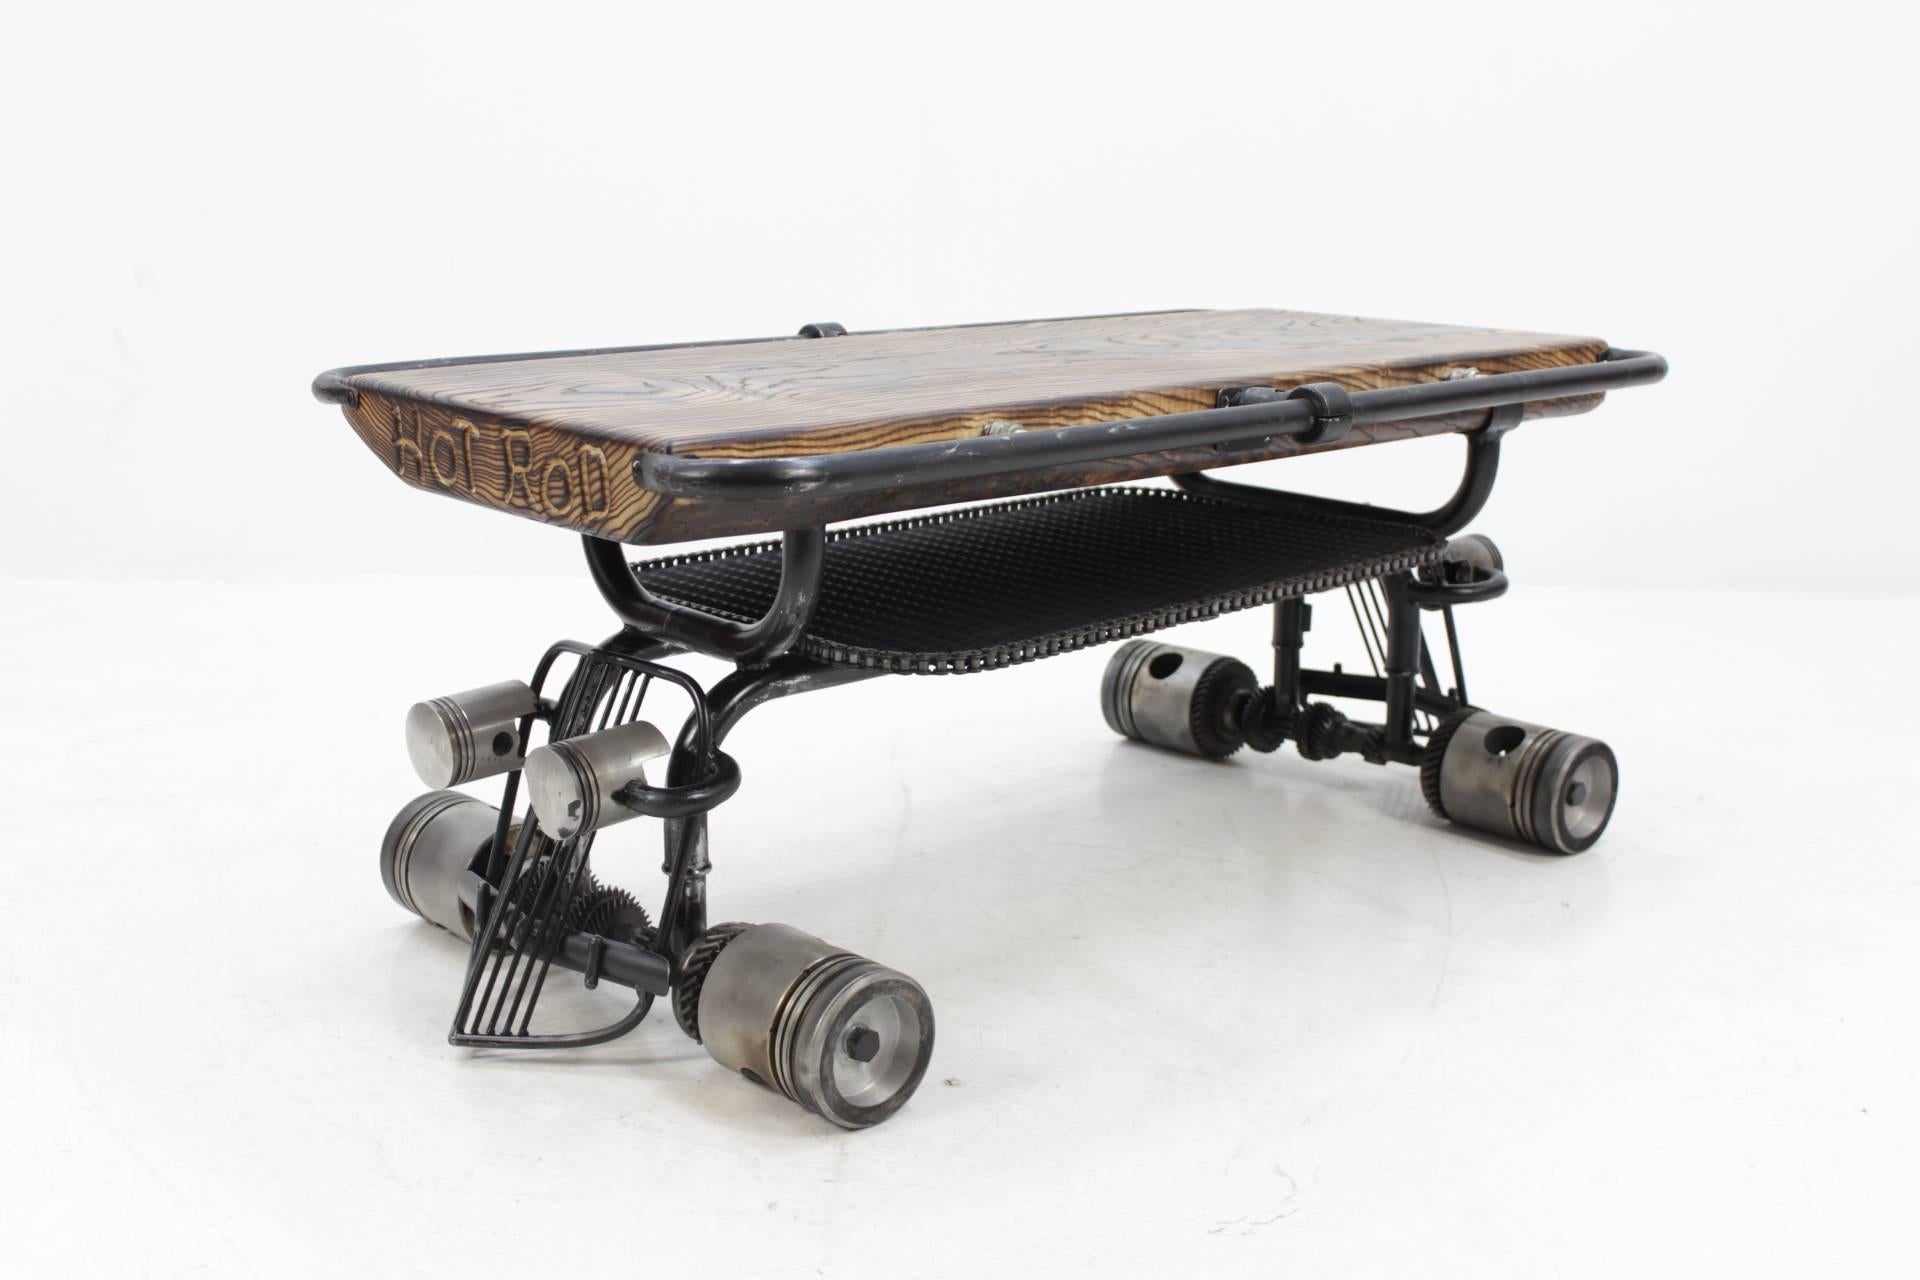 This handmade coffee table was made from recycled parts of motors and other materials. The top desk is from solid ashwood.
Every piece is unique and there is no serie production.
There is possibility of custom order. (Dimensions ,wood, etc.)